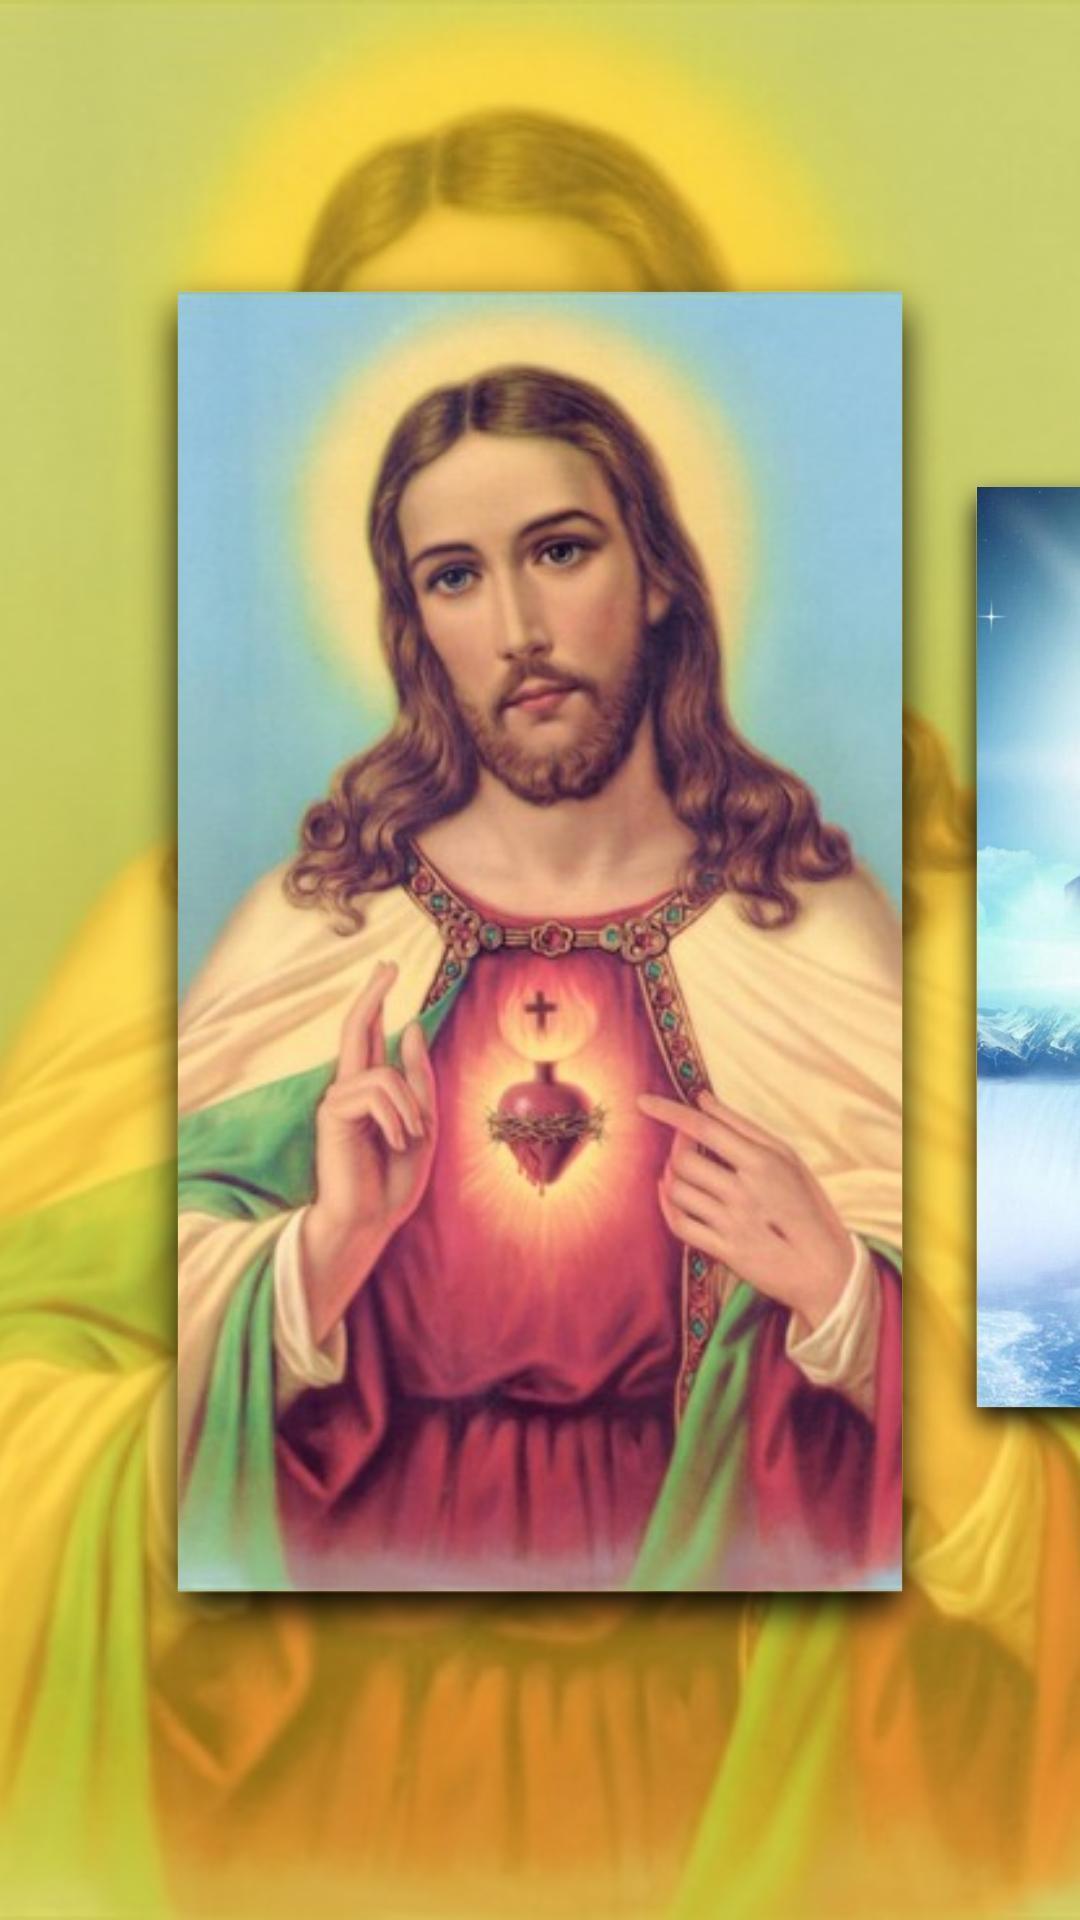 Jesus Wallpaper HD 2018 for Android - APK Download